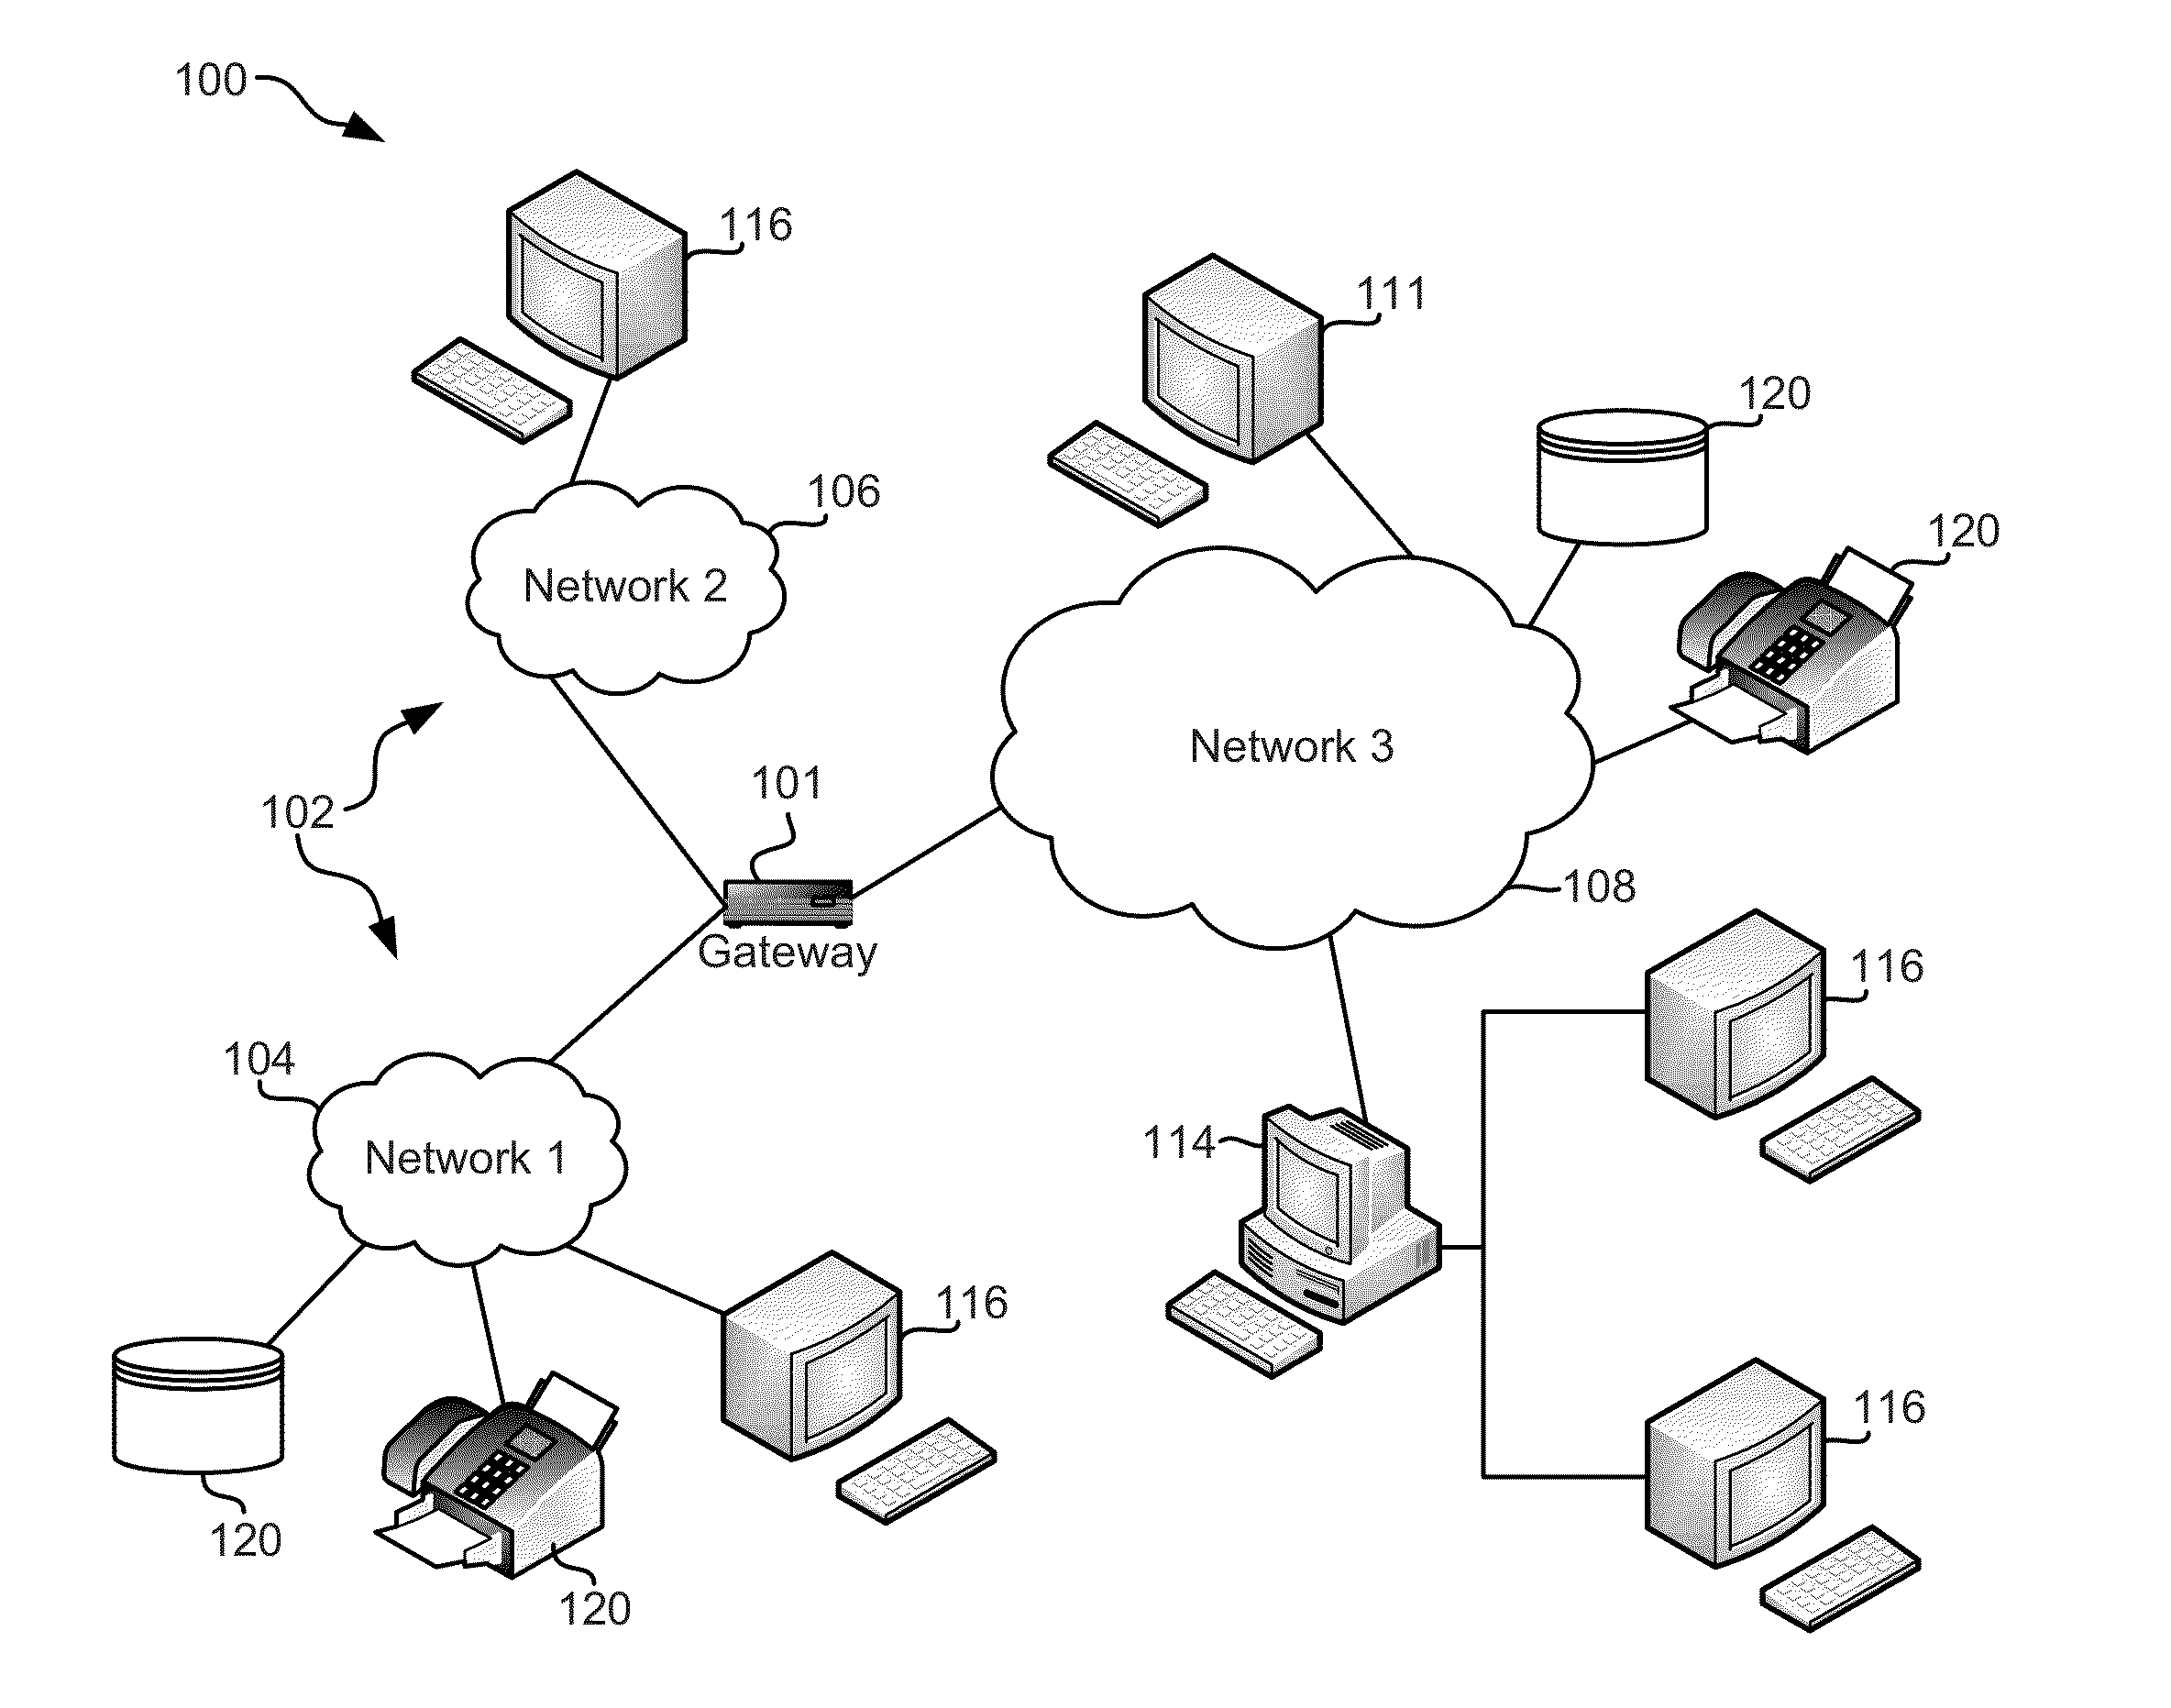 Systems and methods for detecting and classifying objects in video captured using mobile devices